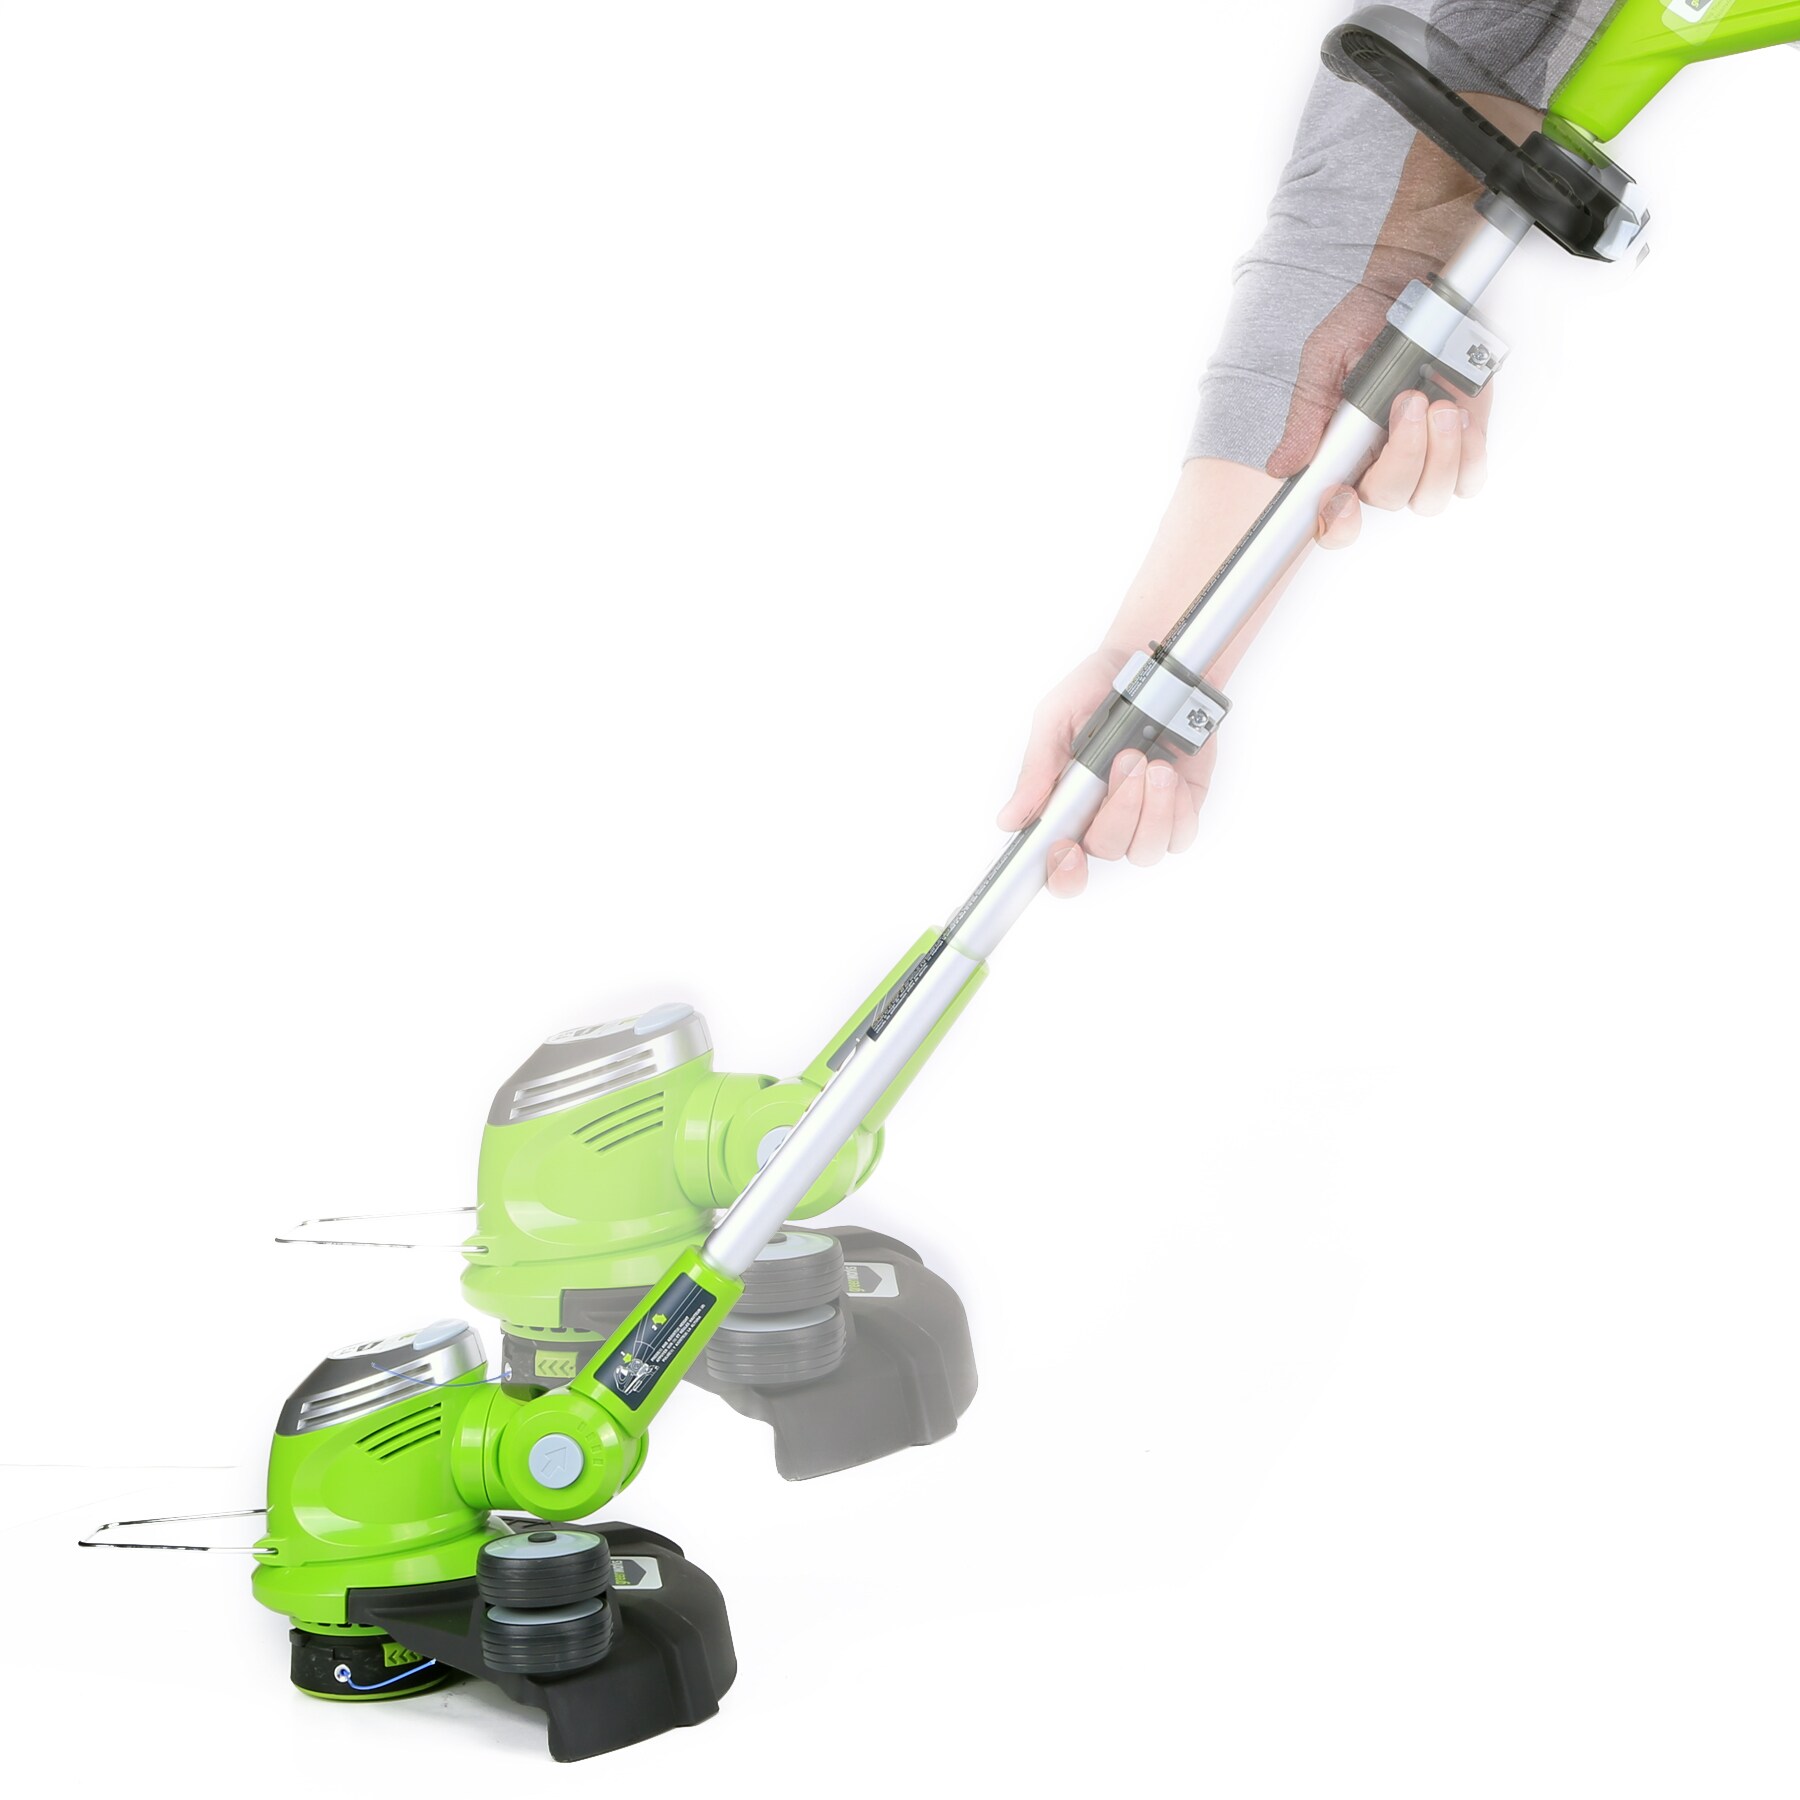 5.5 Amp 15 in. Electric String Trimmer